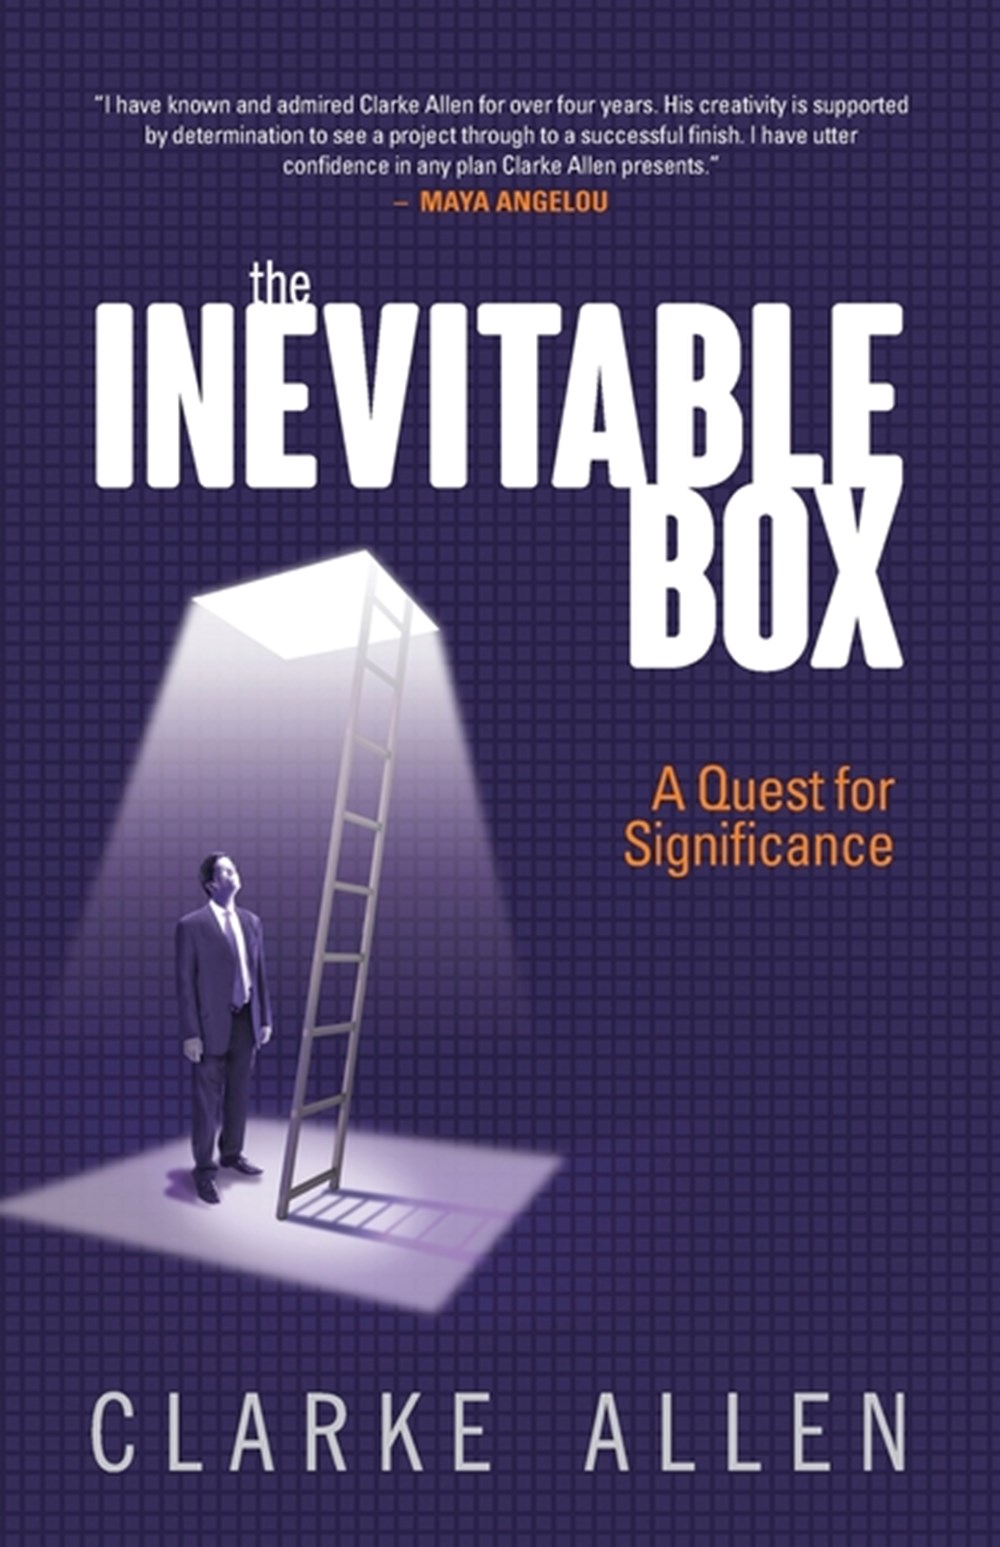 Inevitable Box A Quest for Significance